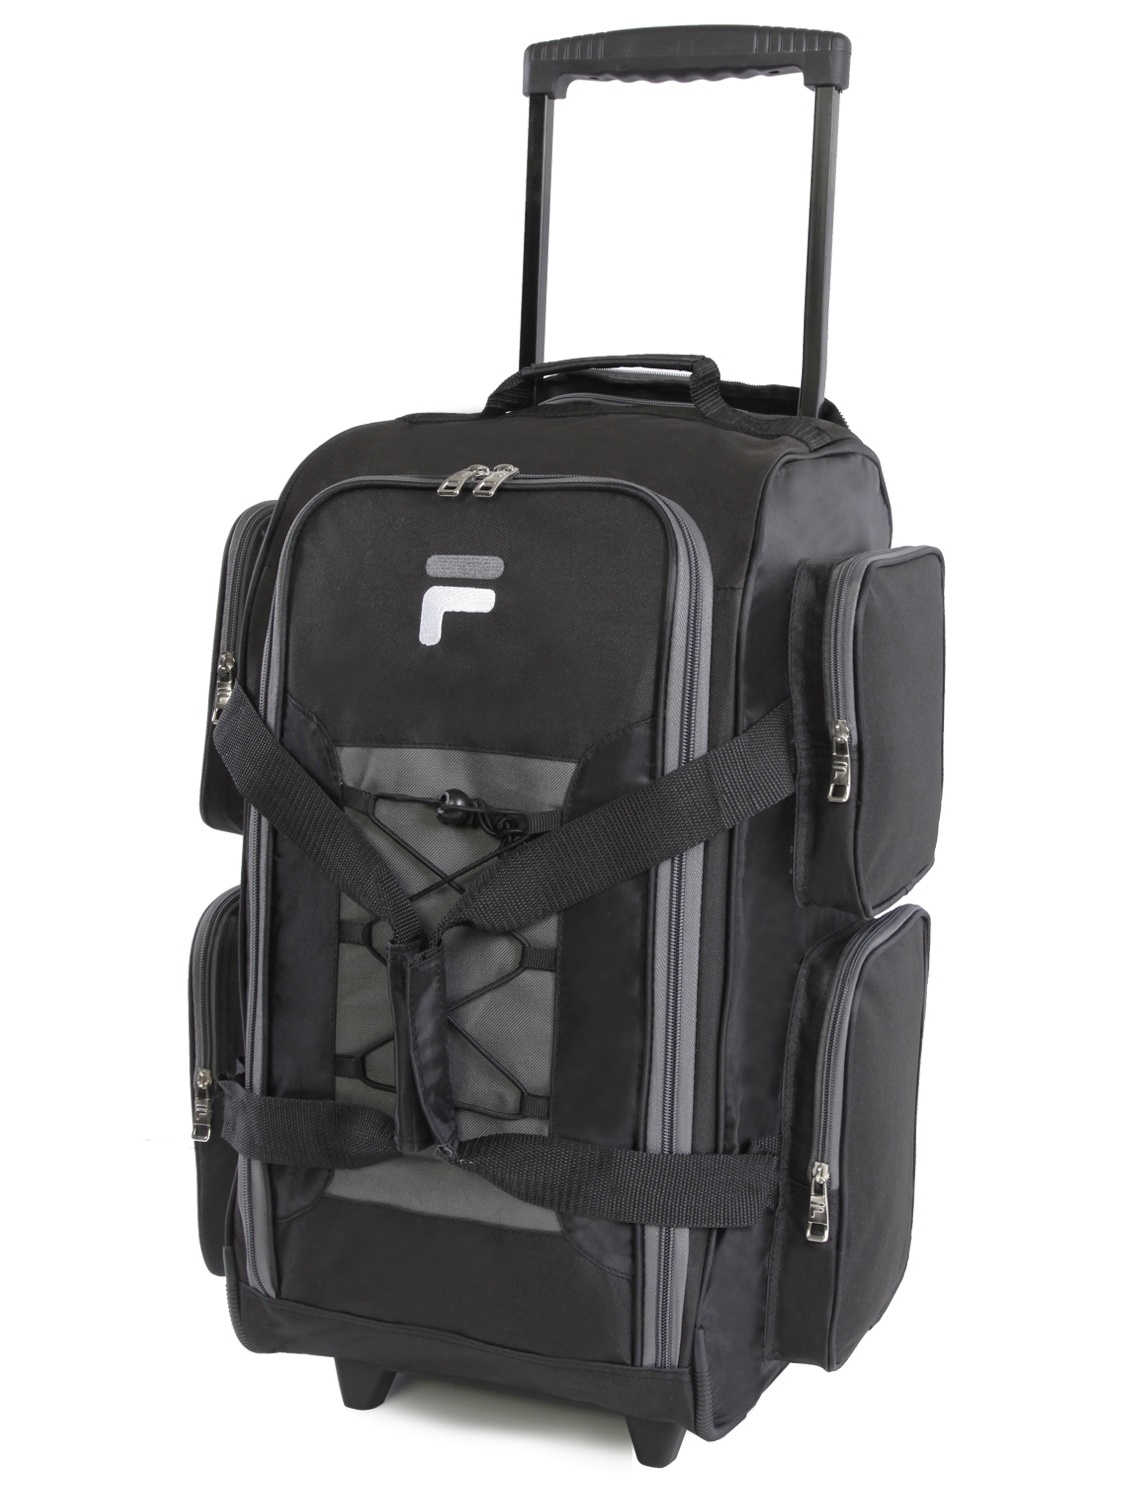 22-inch Lightweight Carry-on Rolling Duffel Bag - image 4 of 5